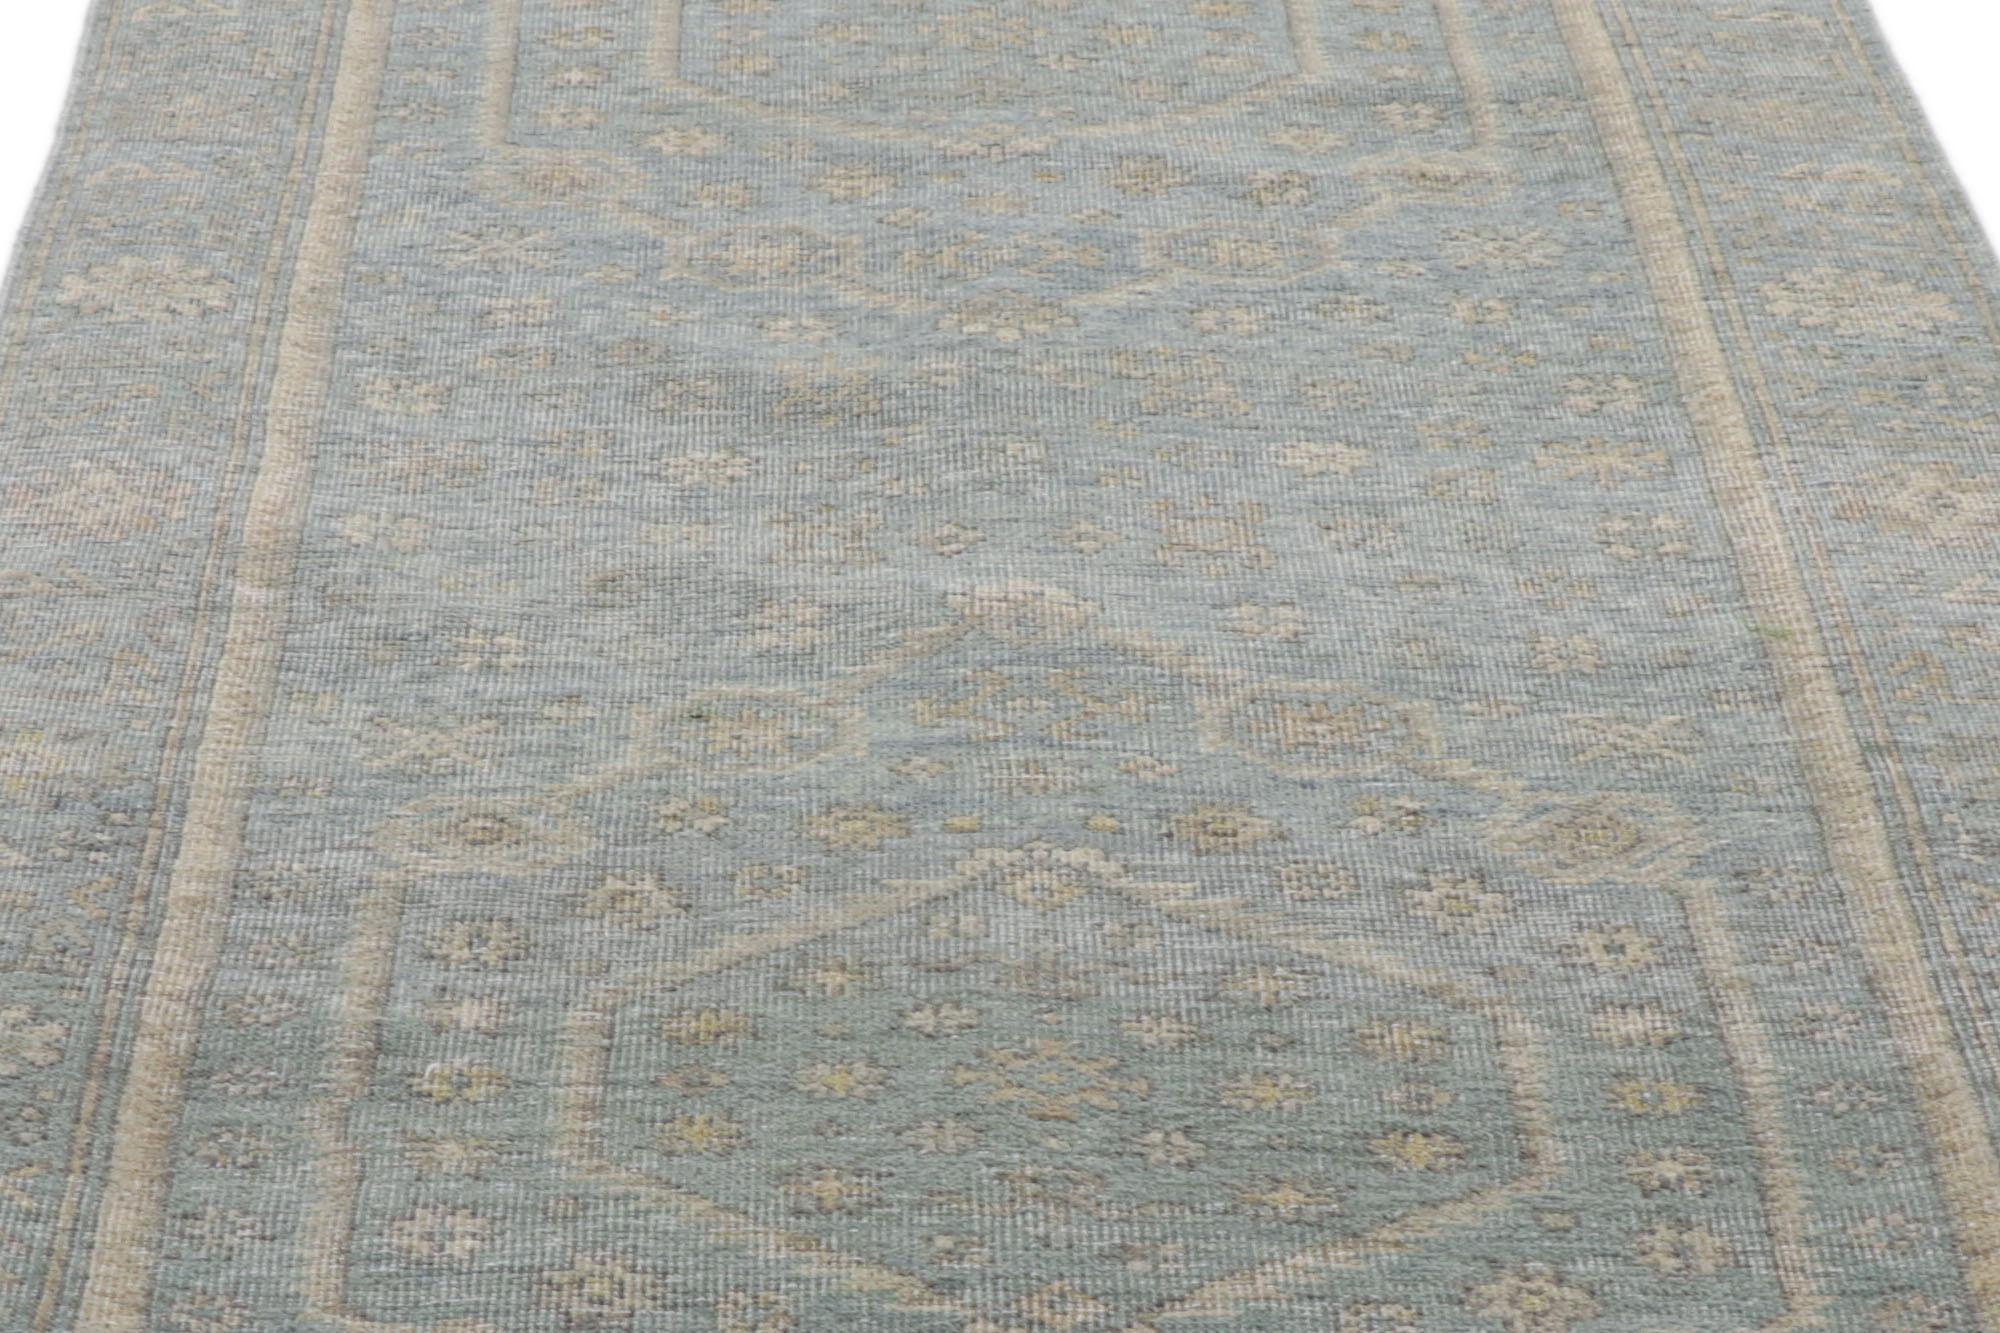 Vintage-Inspired Modern Oushak Rug, Casual Elegance Meets Timeless Appeal In New Condition For Sale In Dallas, TX